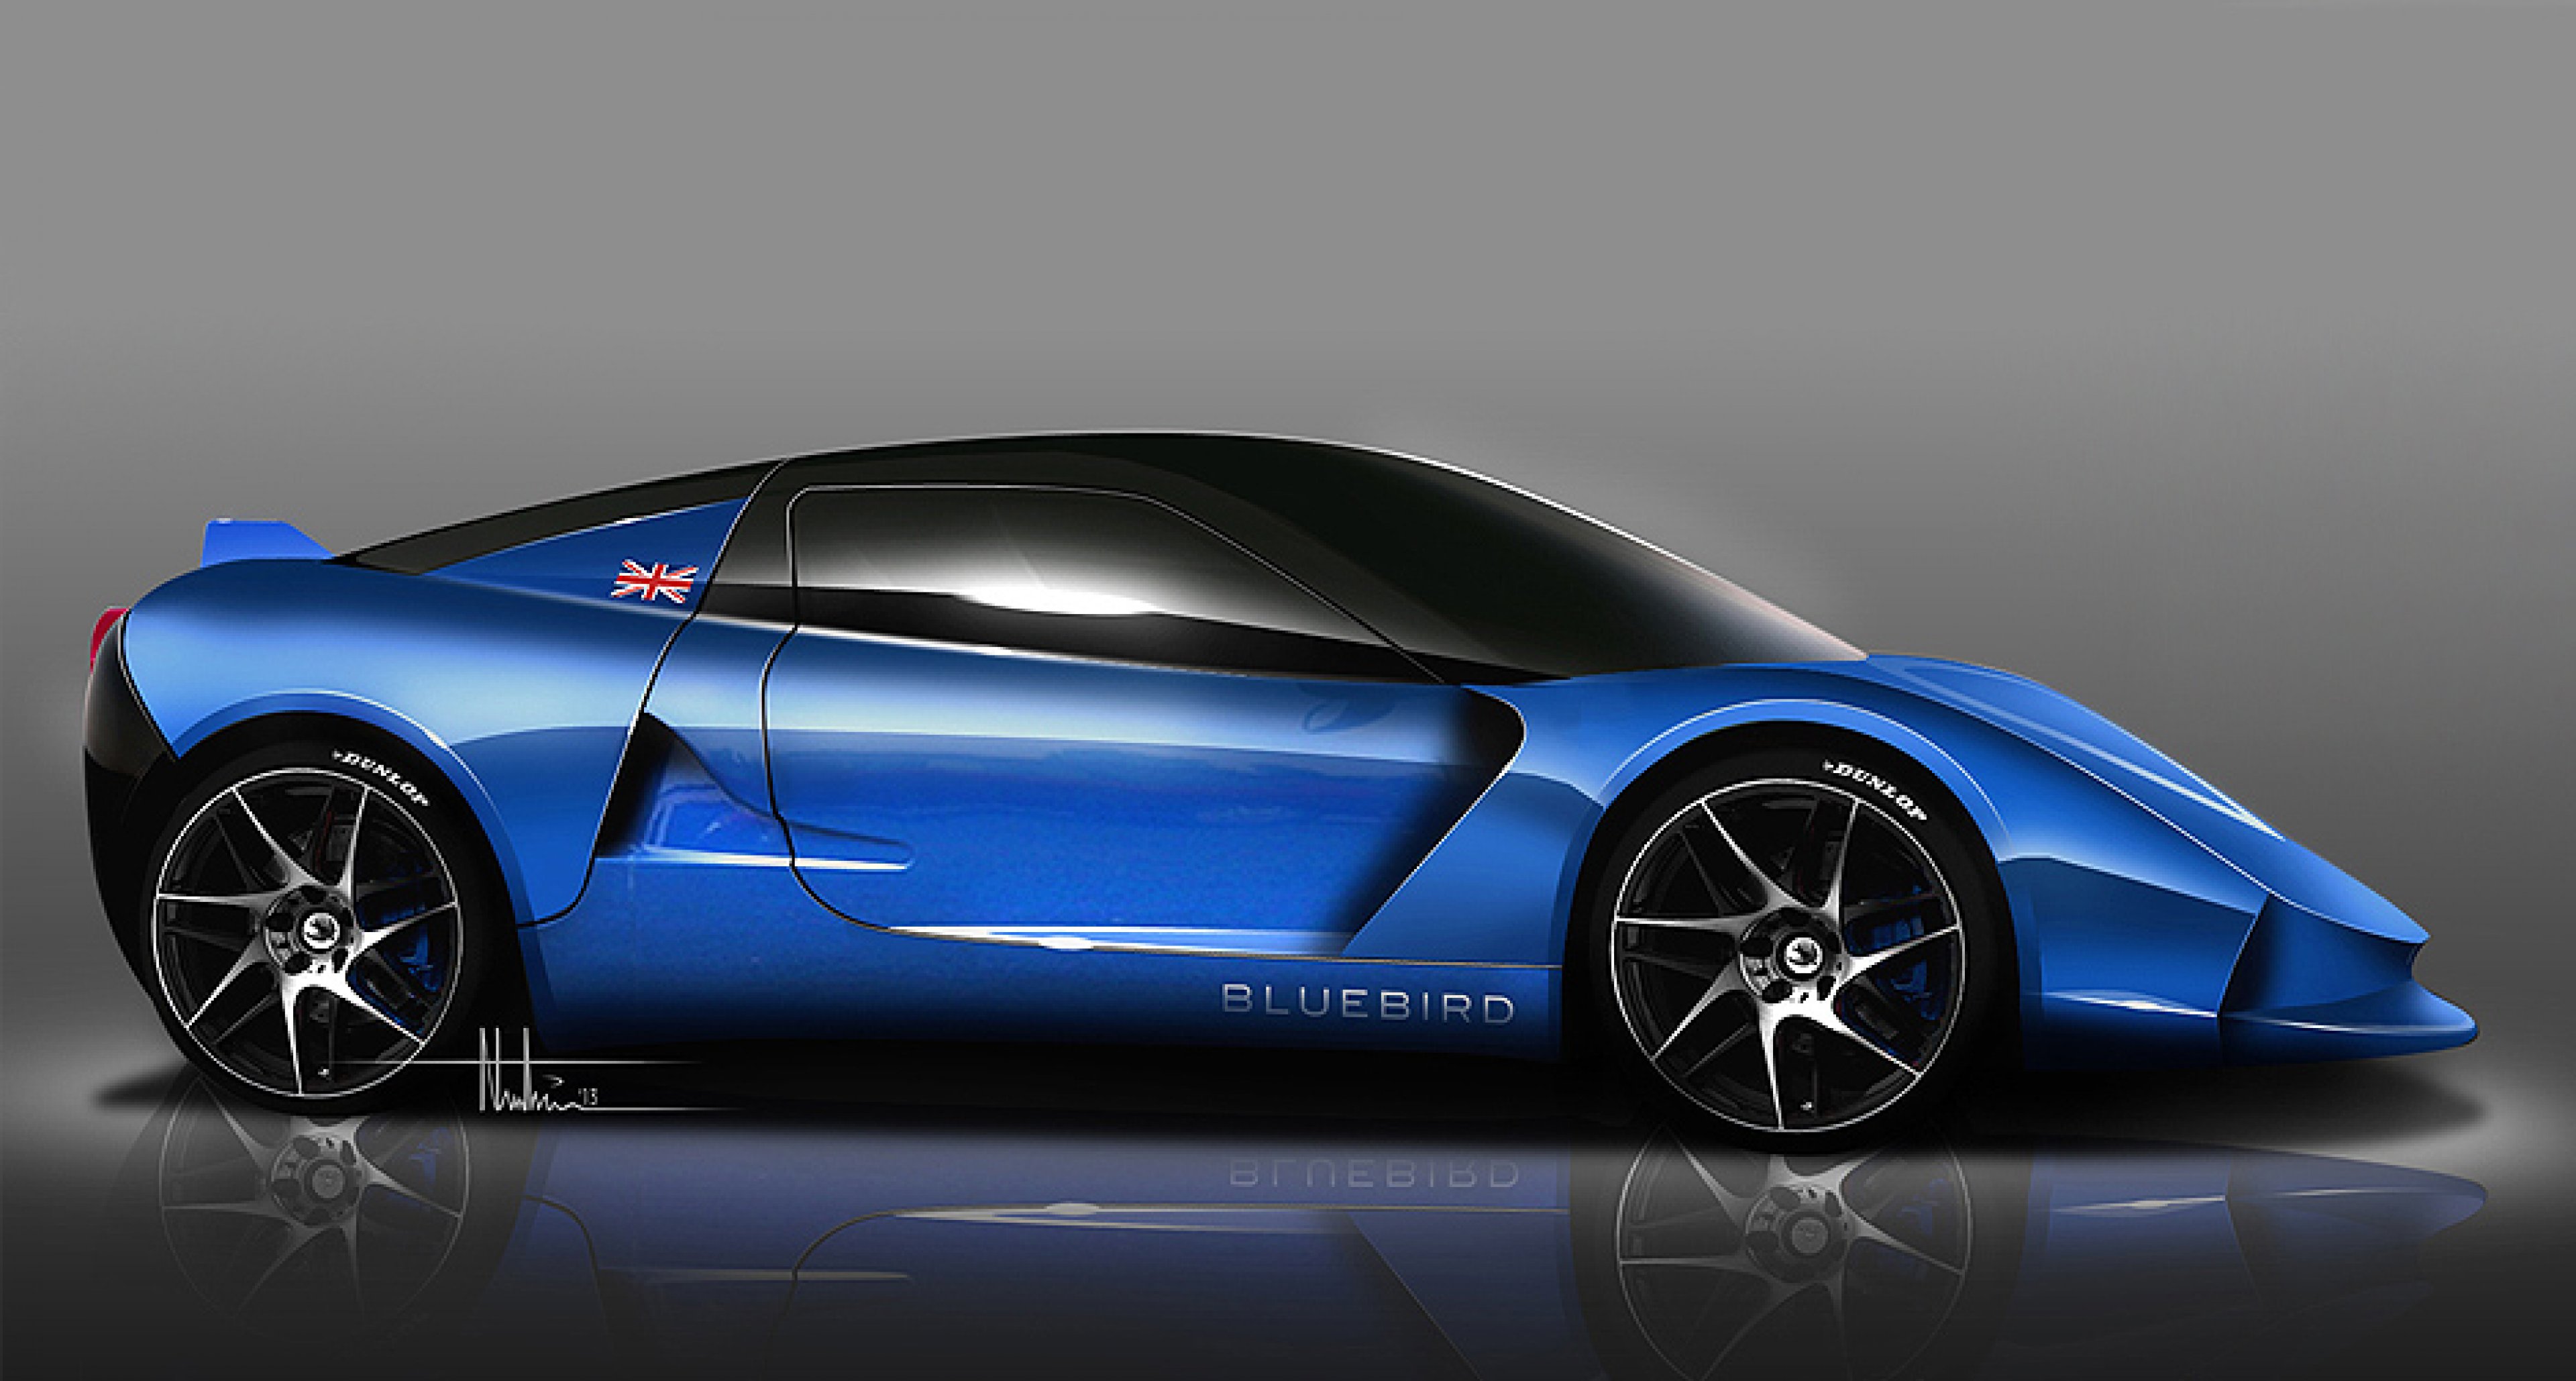 Electric Blue 50 Electric Bluebird Sports Cars To Go On Sale Classic Driver Magazine